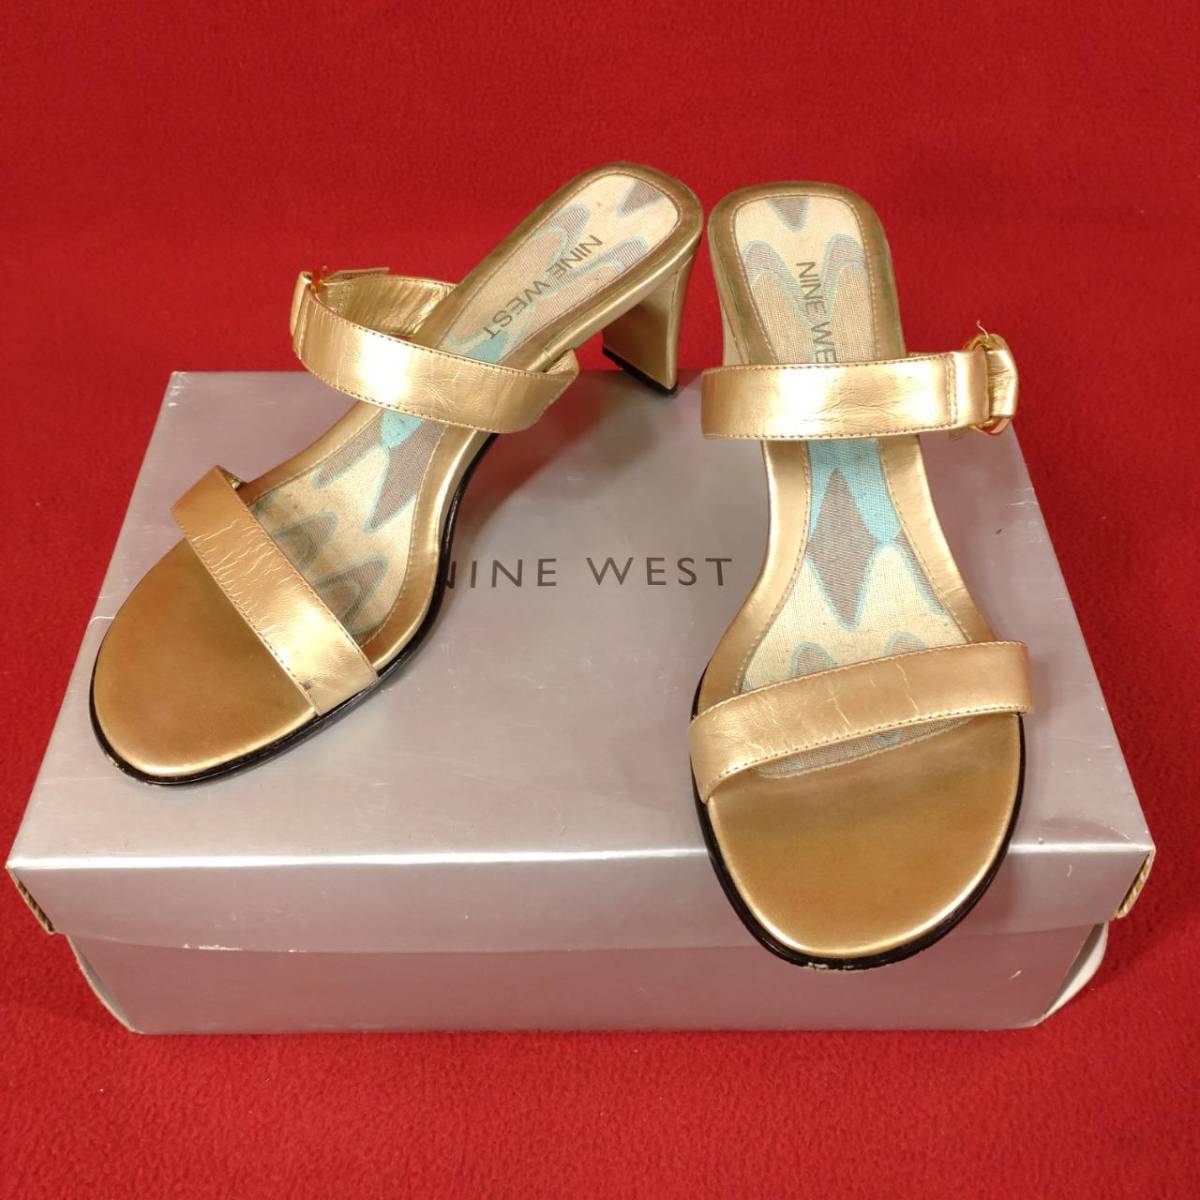 ② Nine West NINE WEST mules 7M Japan size 24cm Gold sandals lady's fashion casual na in waste to